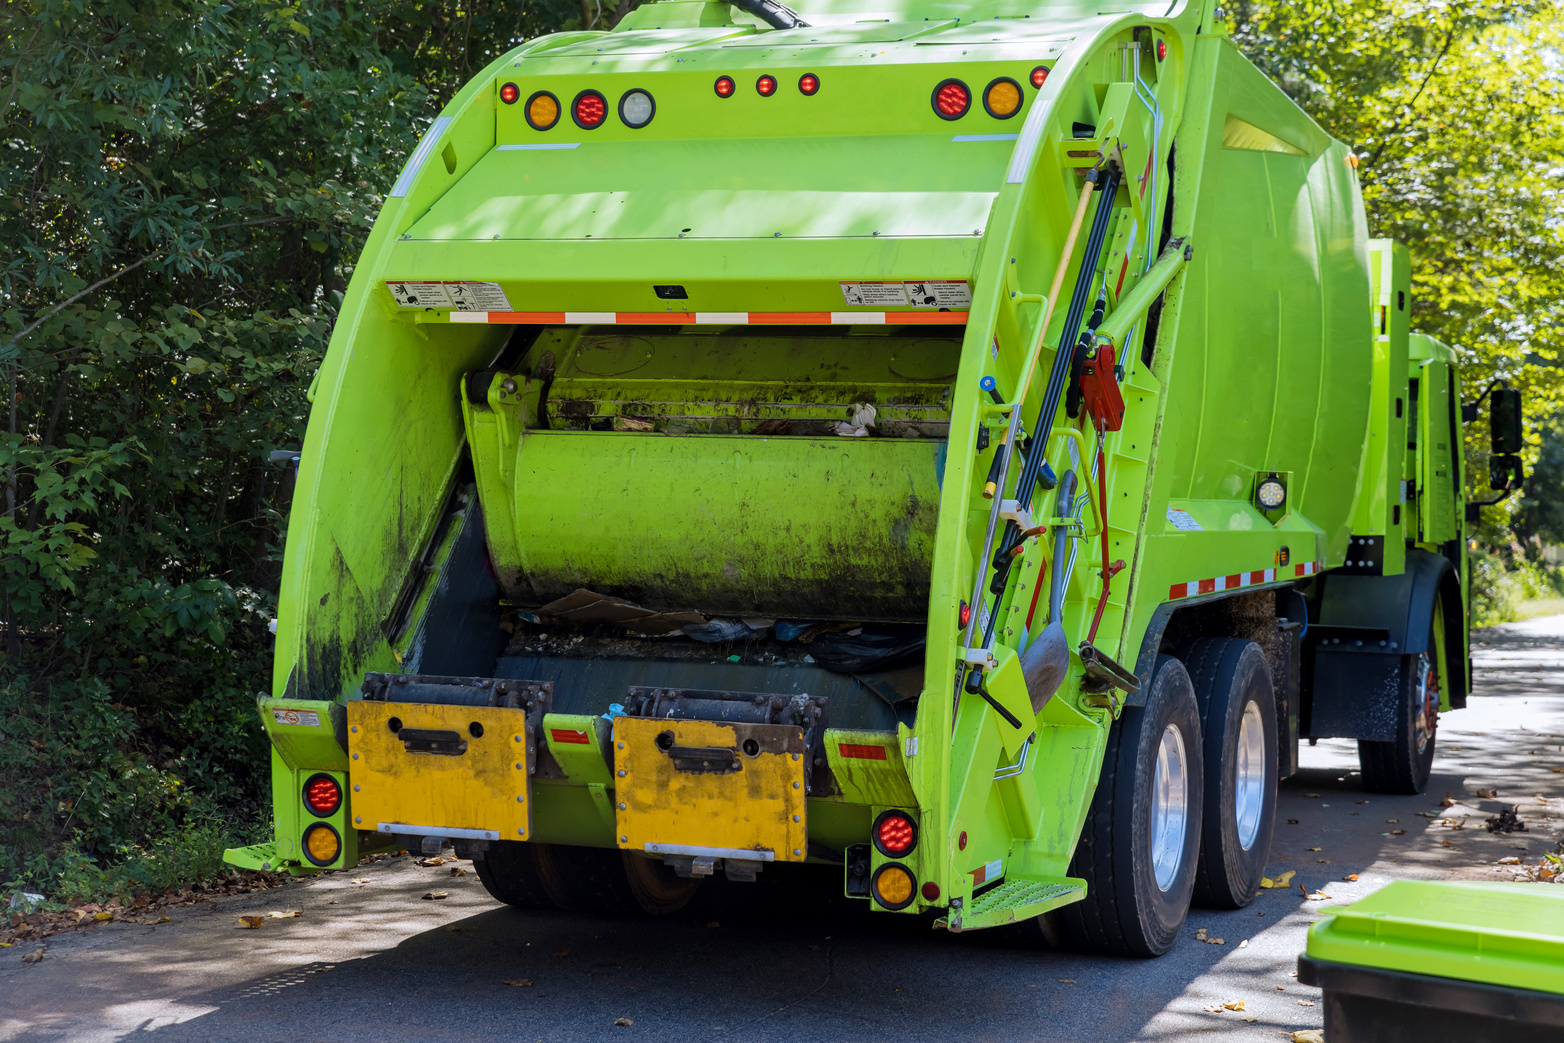 Mixed domestic waste collection truck for use in residential areas to collect mixed household waste